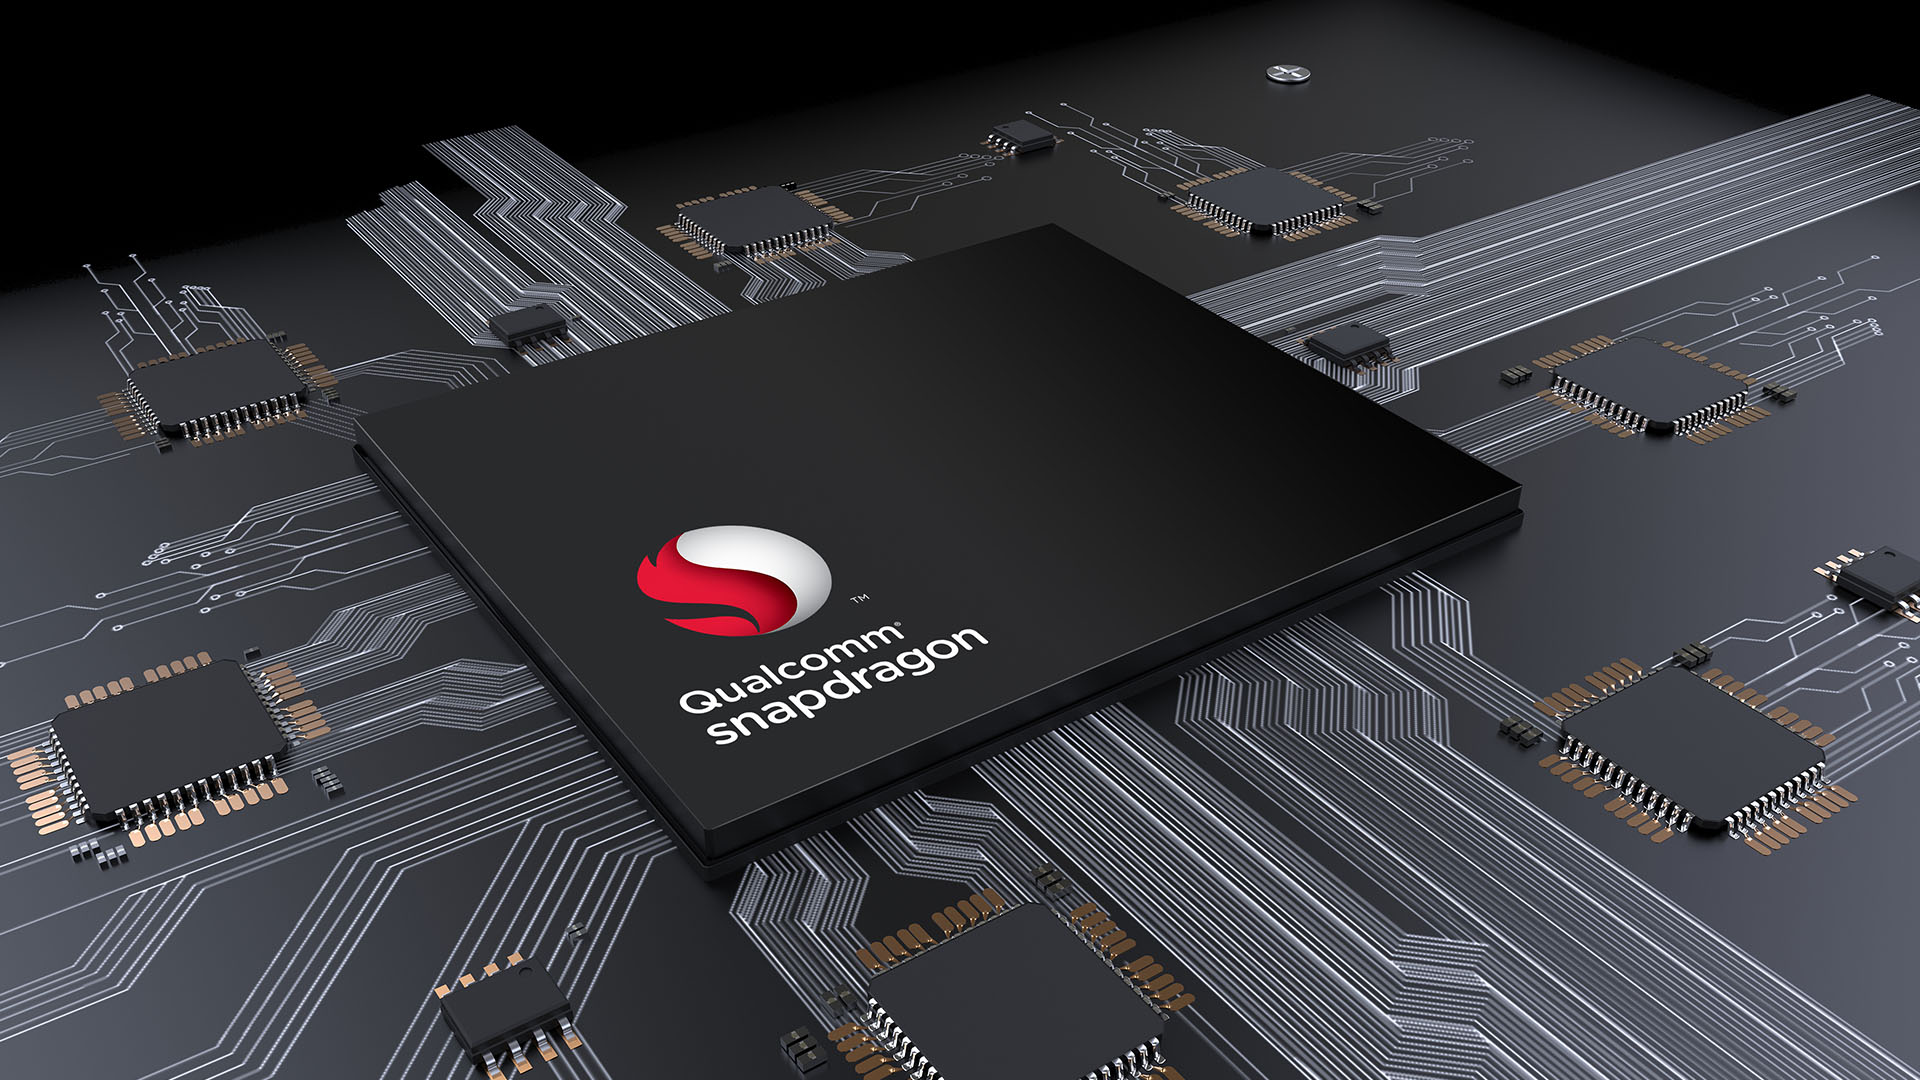 Qualcomm announces its latest flagship chipset, the Snapdragon 8 Gen 1, developed on a new architecture with a powerful new Cortex-X2 core. We recently compared the Snapdragon 8 Gen 1 to the MediaTel Dimensity 9000 to gauge its performance in the Android market. We also compared Snapdragon 8 Gen 1 to Google Tensor to assess the merits of Google's departure from Qualcomm chipsets. However, in this article, we'll compare Snapdragon 8 Gen 1 to Apple A15 Bionic and Exynos 2100. Let's proceed to the comparison.